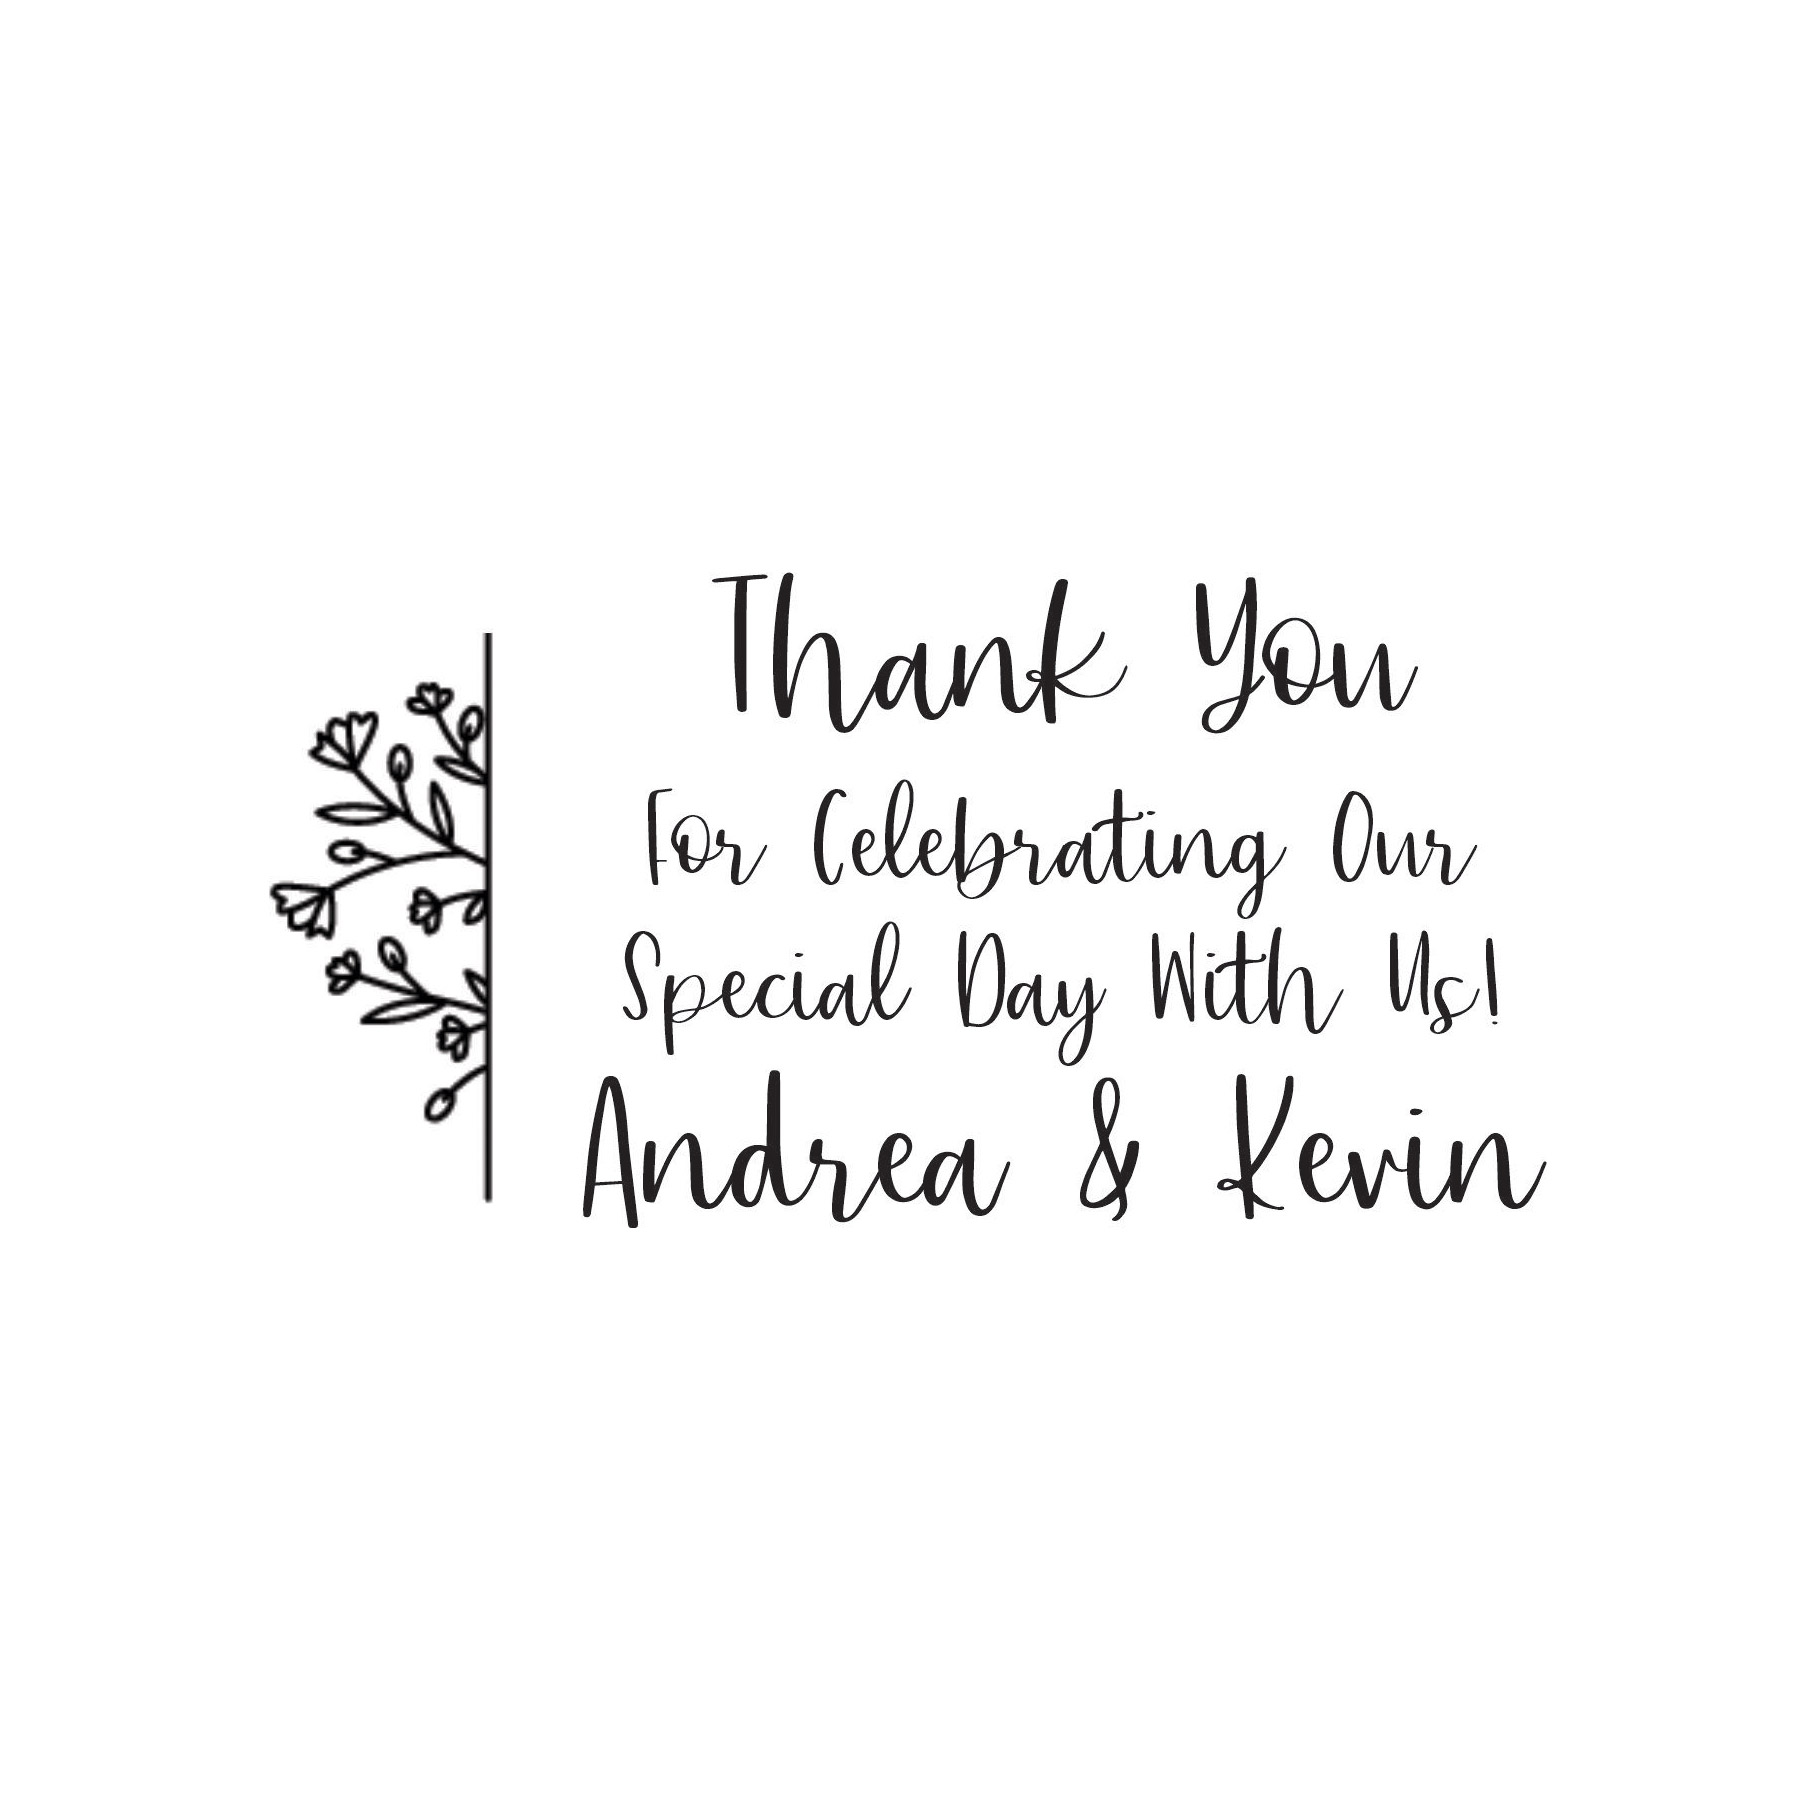 Wedding Stamp A - Thank You